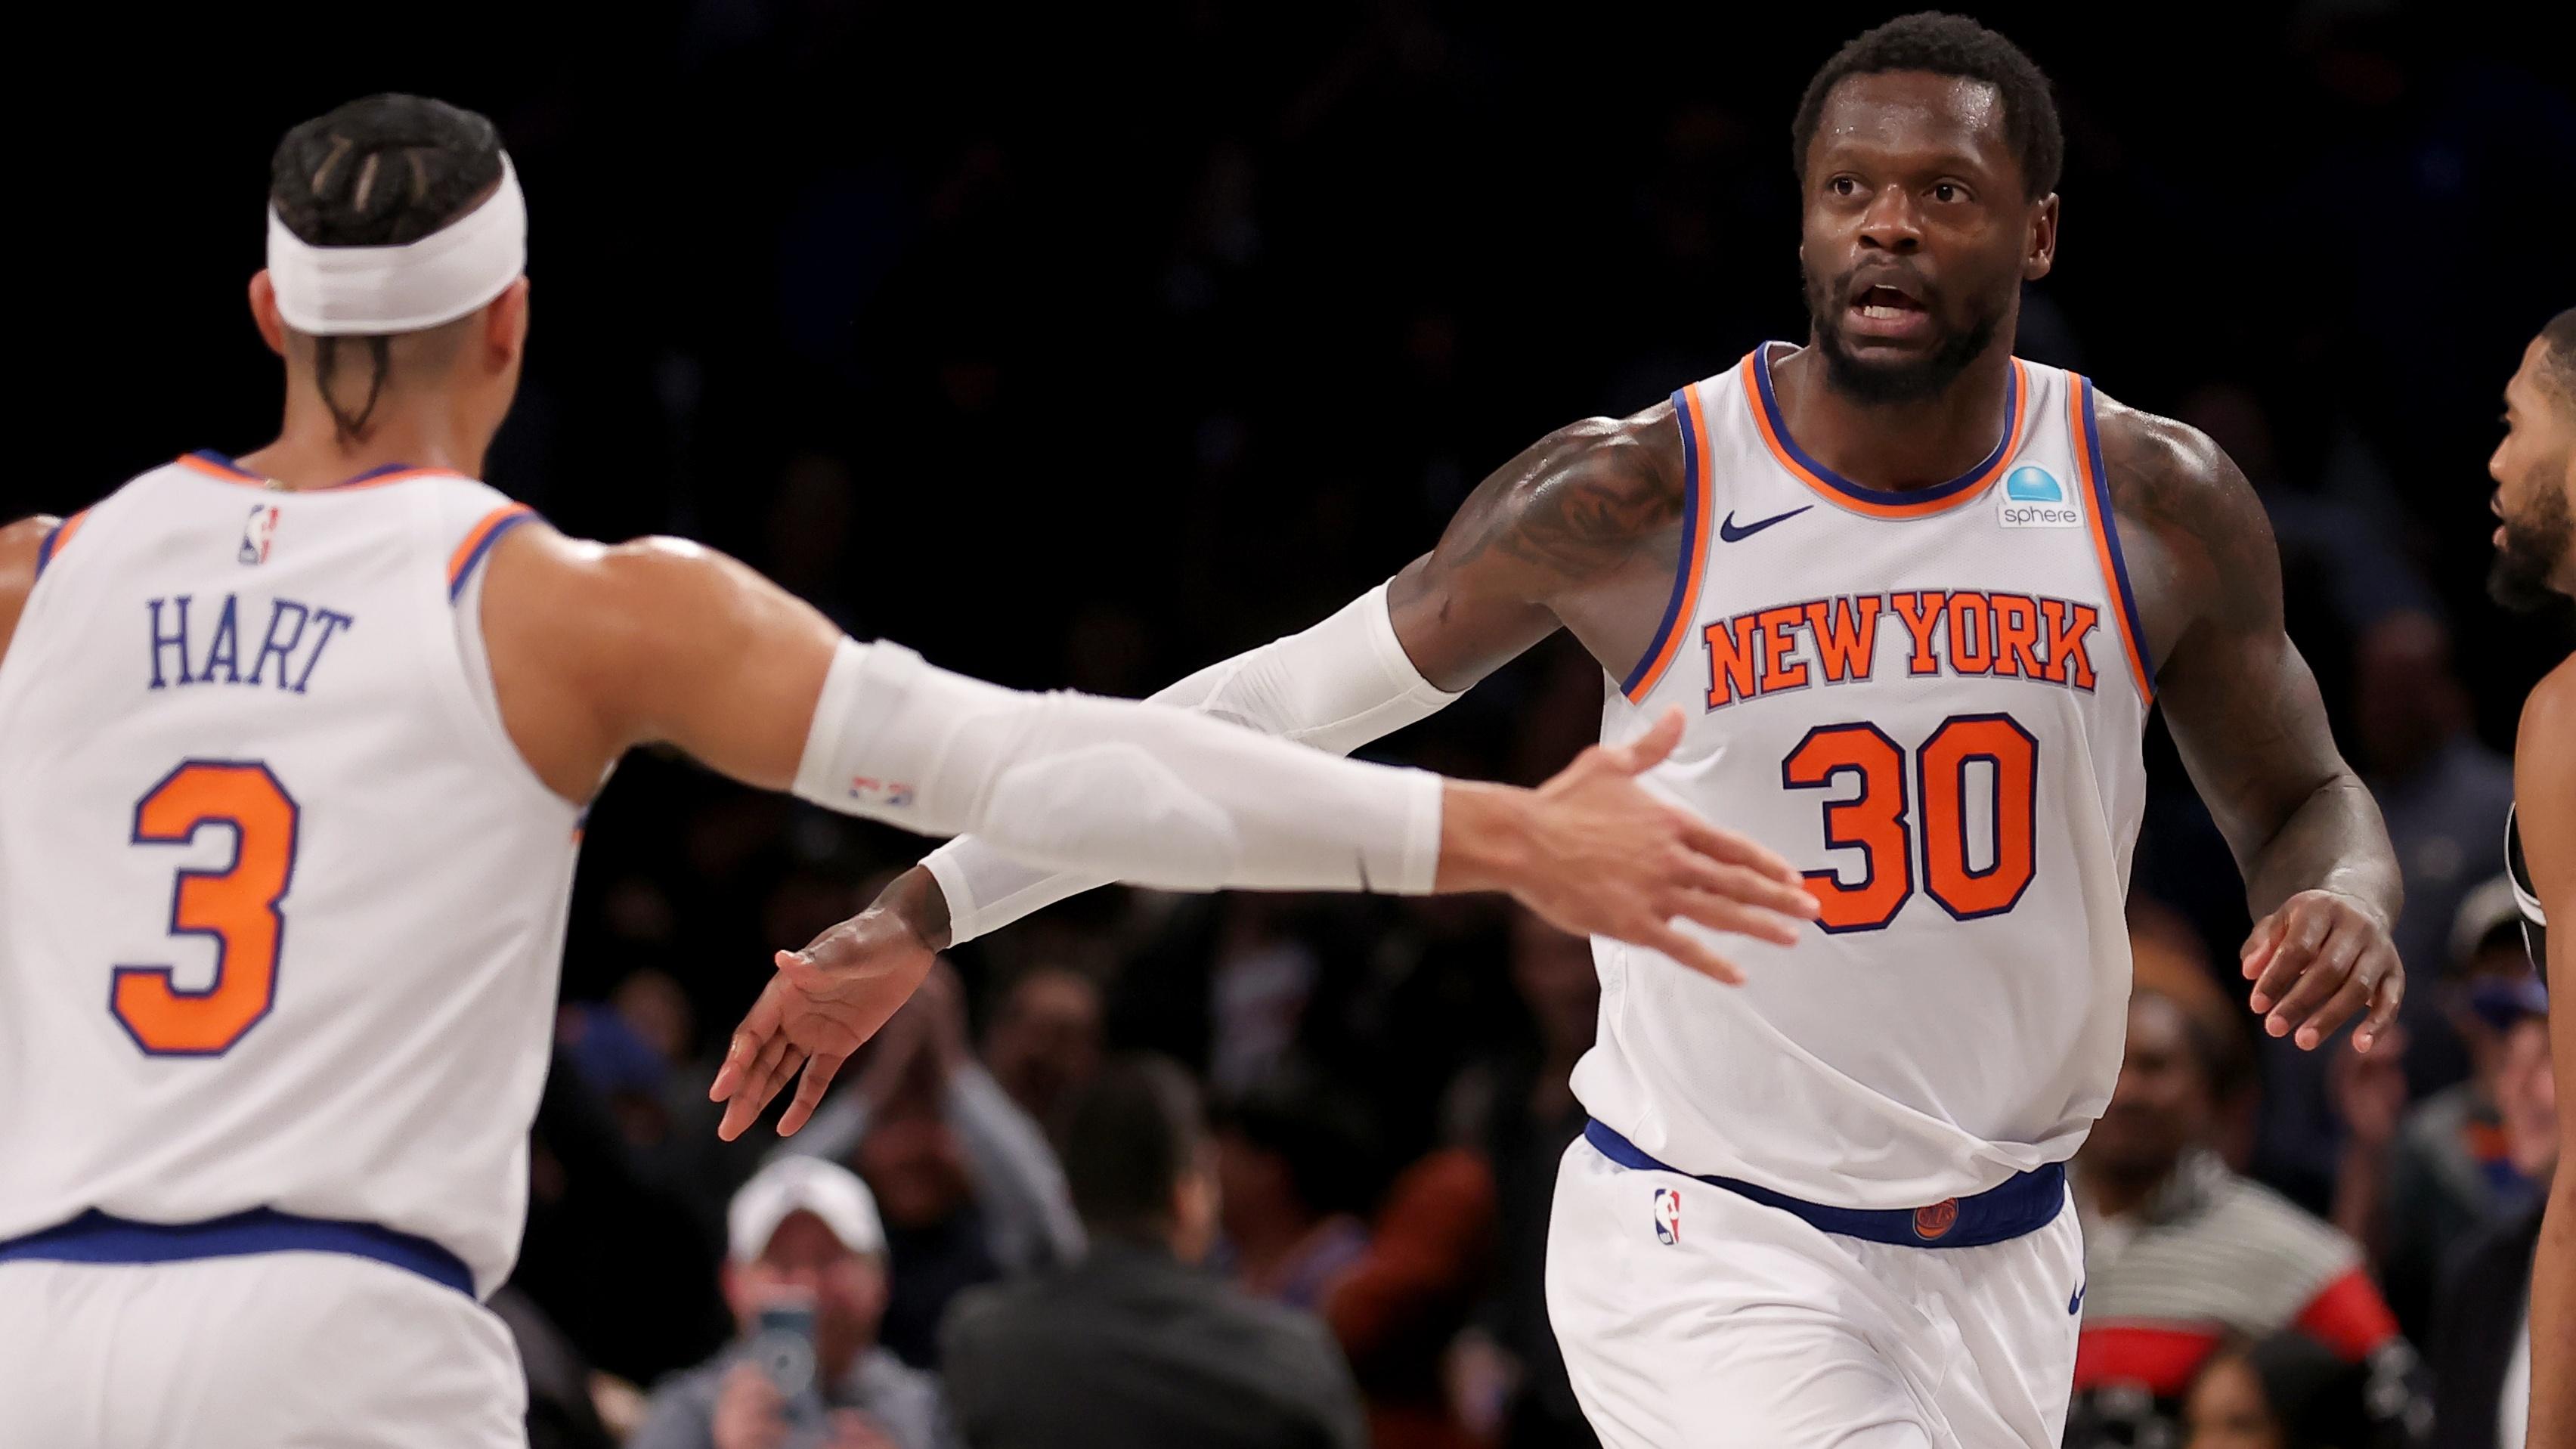 New York Knicks forward Julius Randle (30) high fives guard Josh Hart (3) in front of Brooklyn Nets forward Mikal Bridges (1) during the fourth quarter at Barclays Center / Brad Penner - USA TODAY Sports